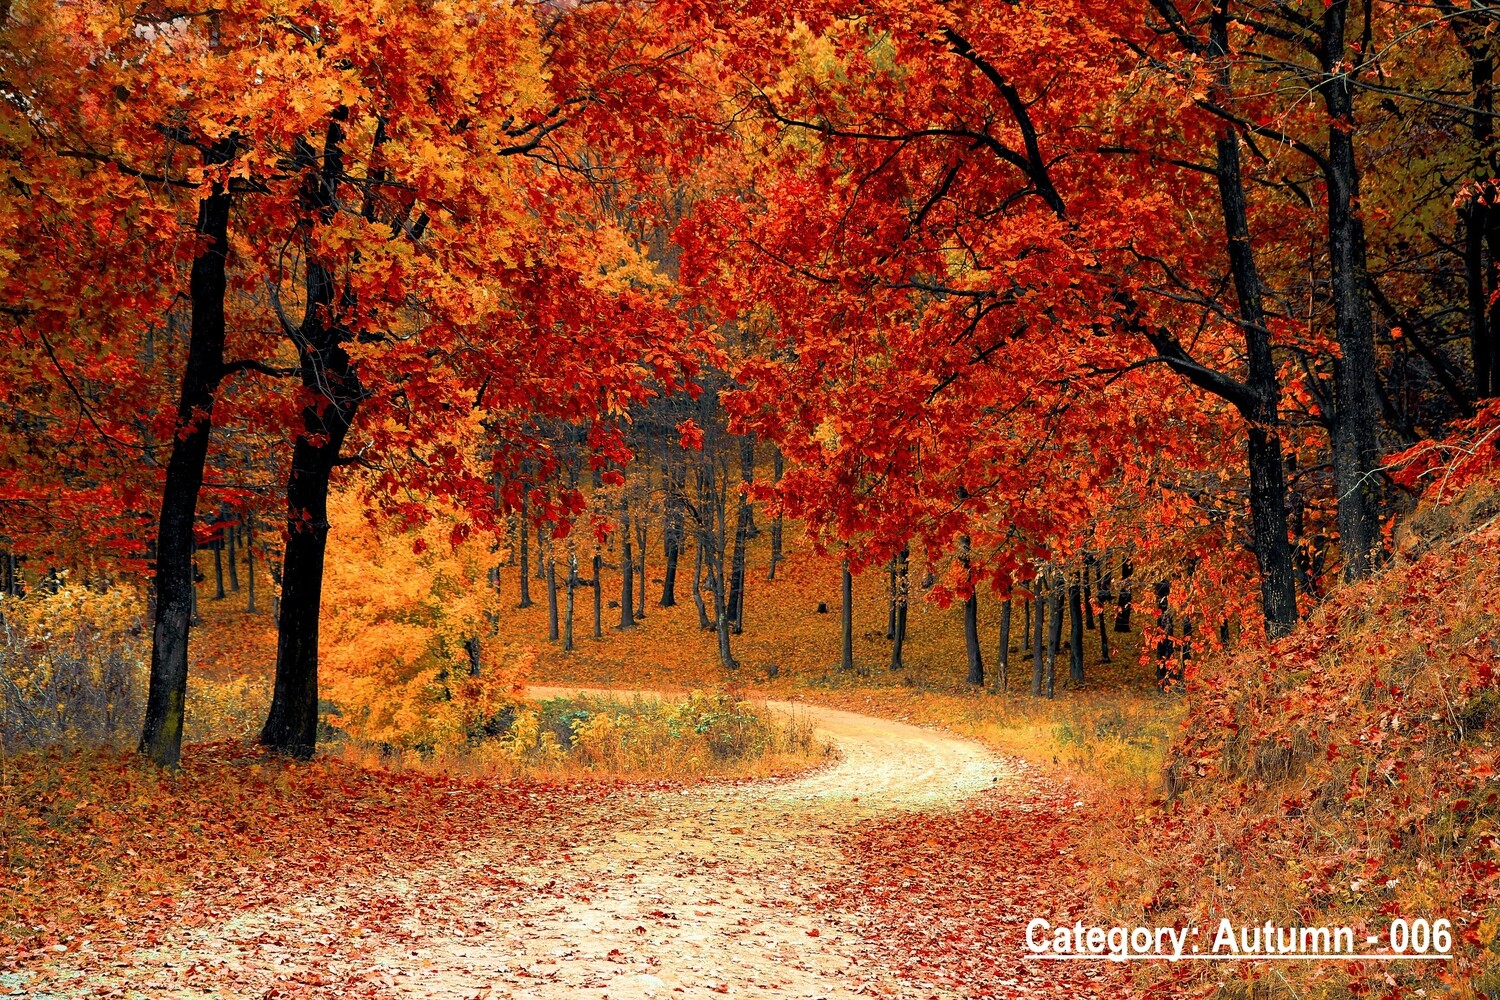 Autumn Scenery Images Placemats single or double sided 12 x 18 | Choose from hundreds of stock design images.